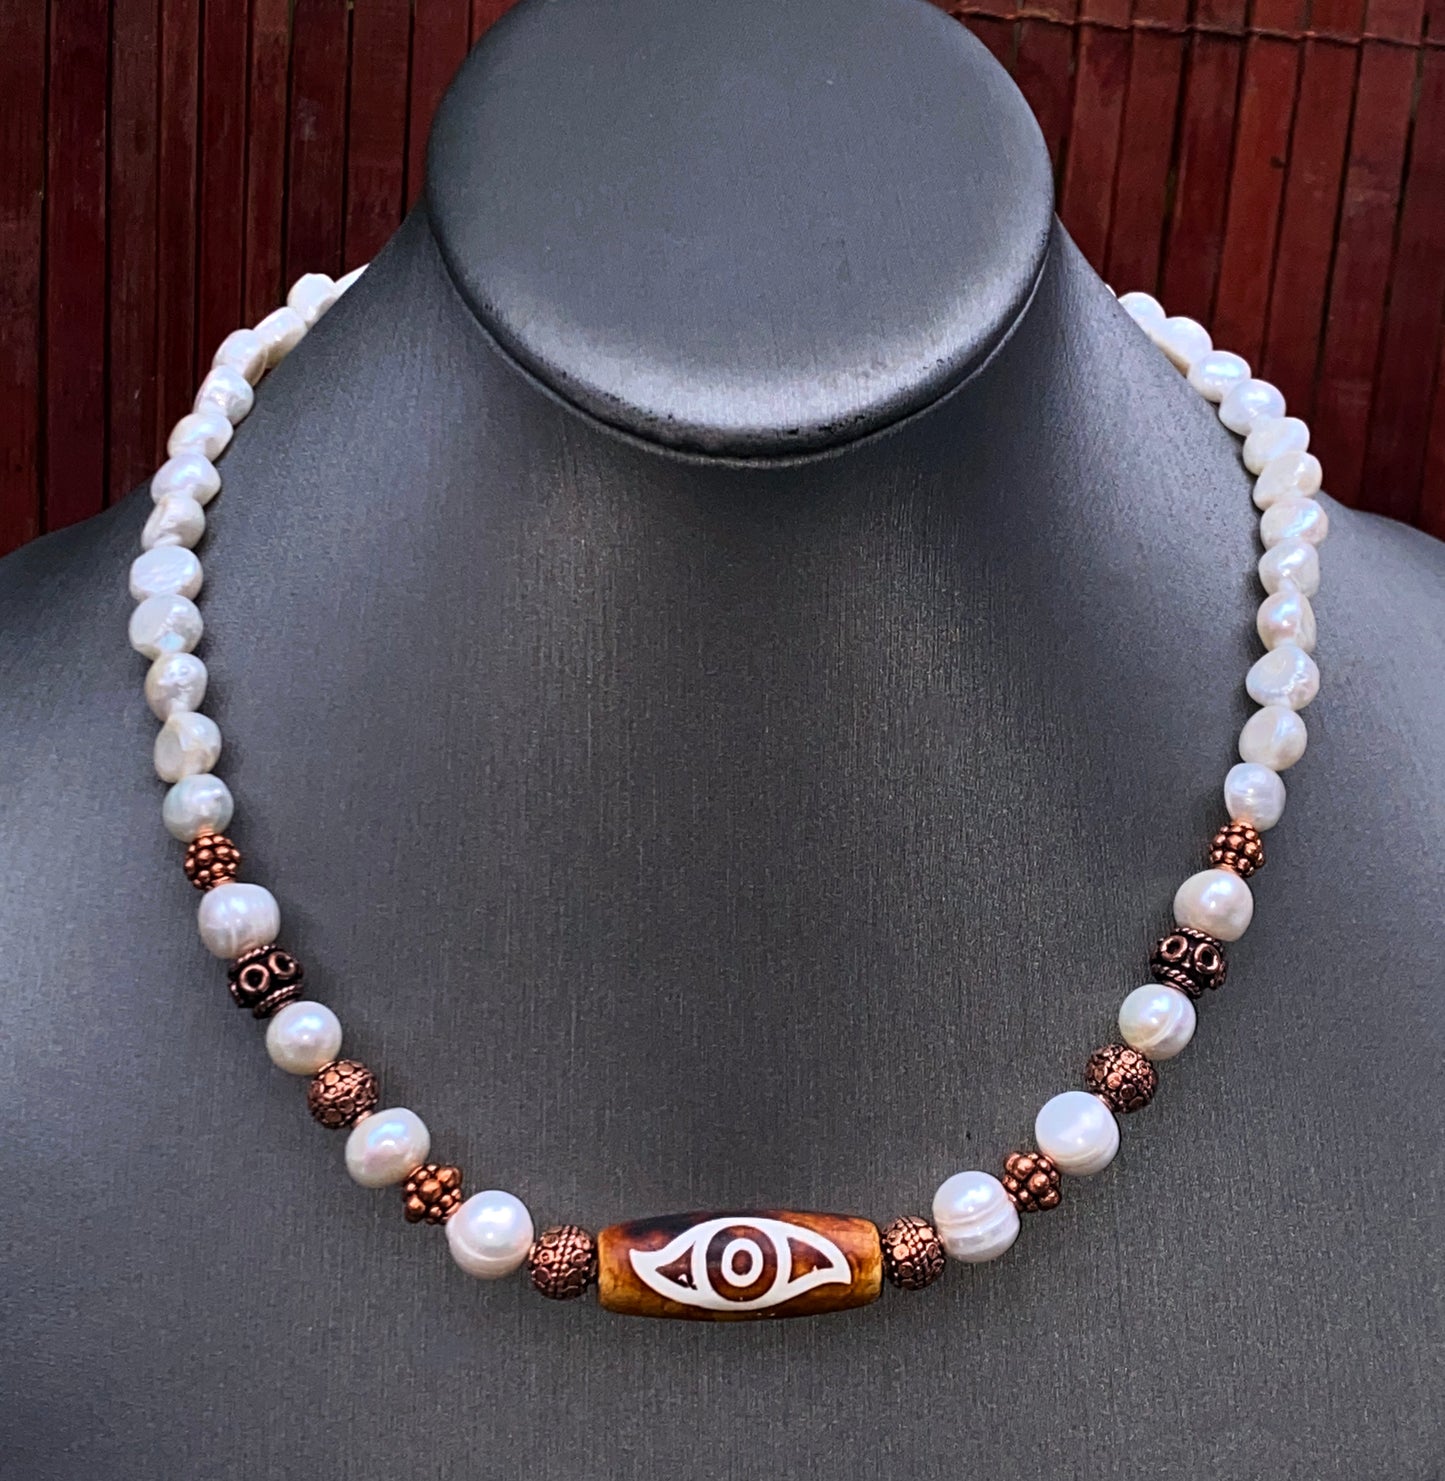 Tibetan Agate and Beaded Pearl Necklace